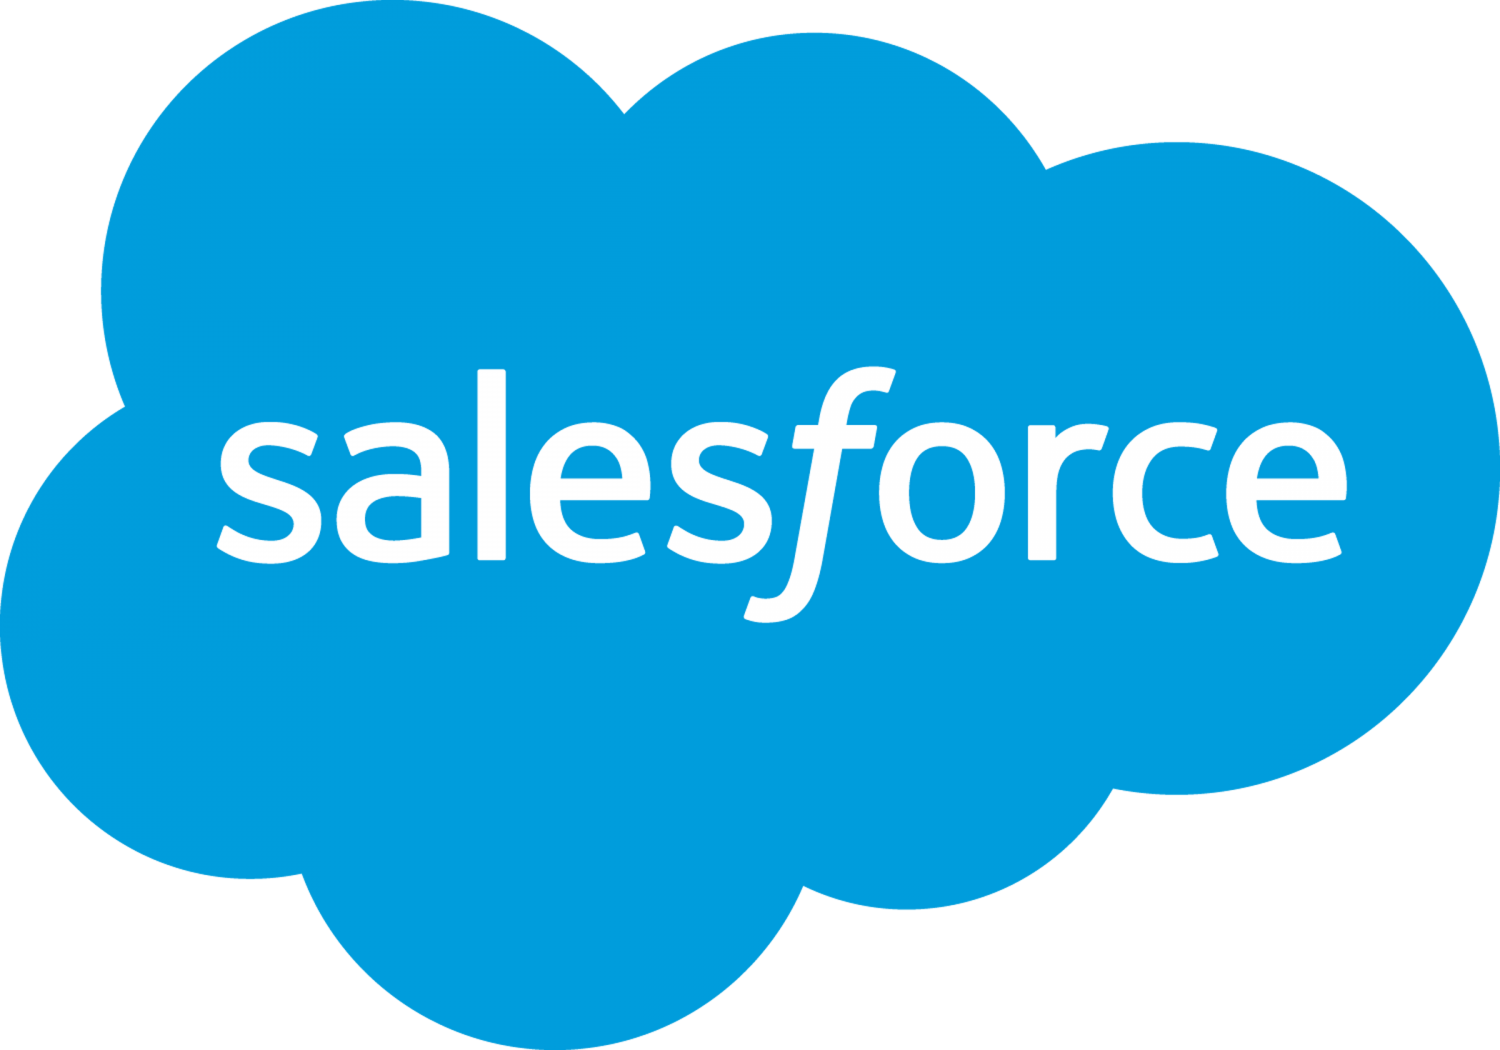 salesforce - one of the biggest tech companies in Austin